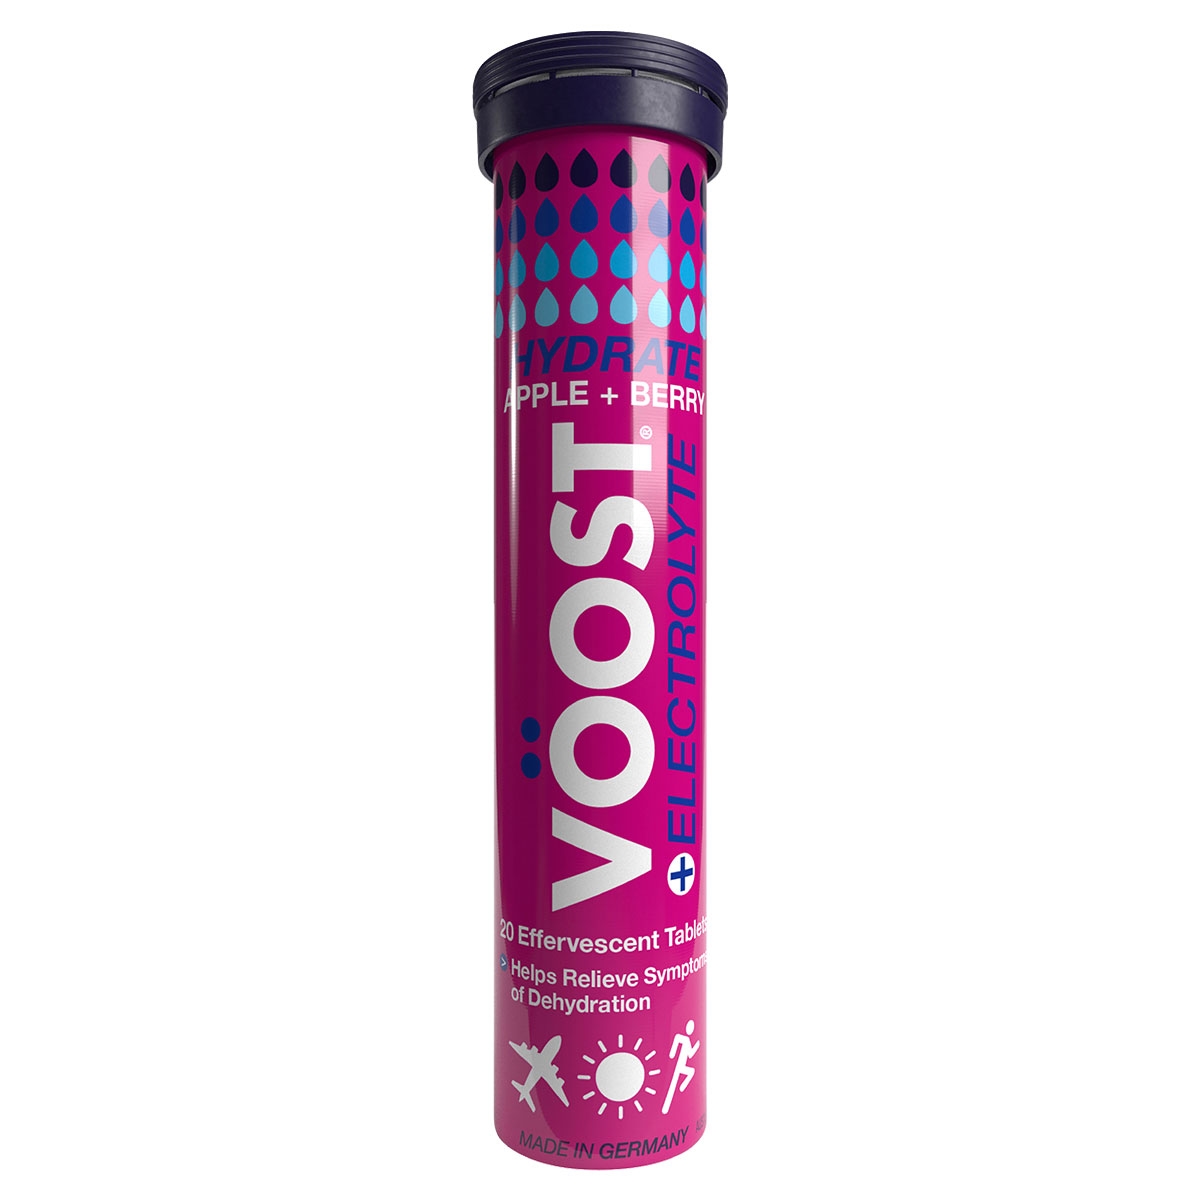 Voost Hydrate Apple + Berry 20 Effervescent Tablets